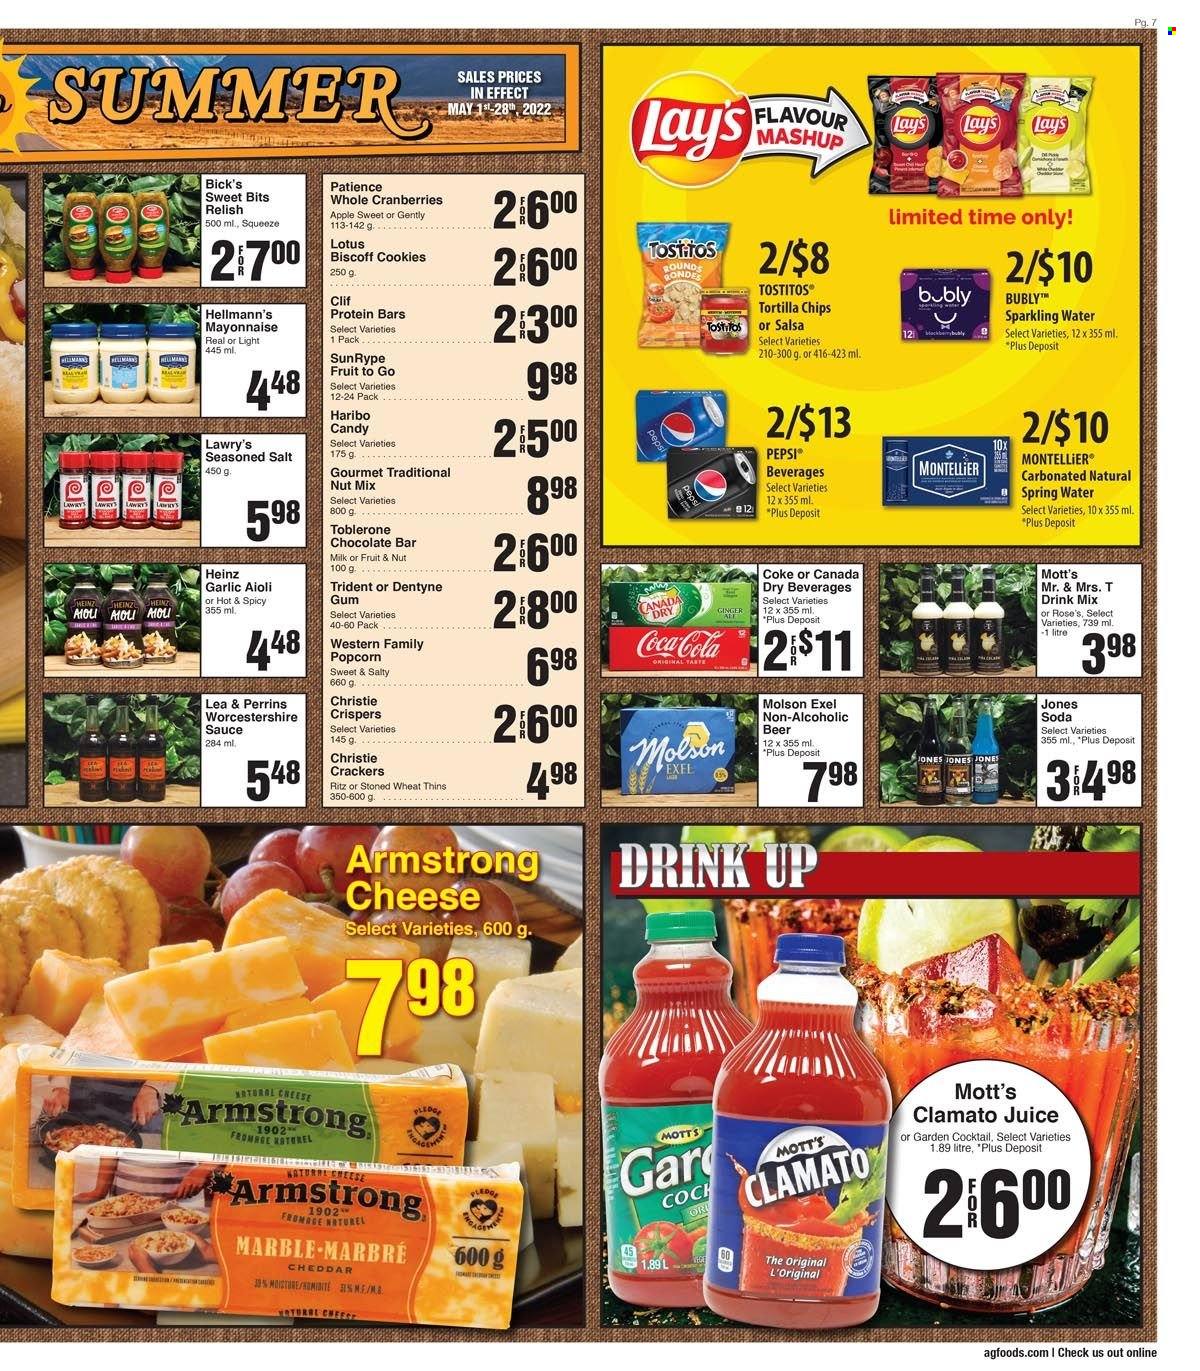 thumbnail - Circulaire AG Foods - 15 Mai 2022 - 21 Mai 2022 - Produits soldés - mayonnaise, Lotus, cookies, popcorn, Toblerone, chips, tortilla chips, crackers, Heinz, Pepsi, soda, Cif. Page 7.